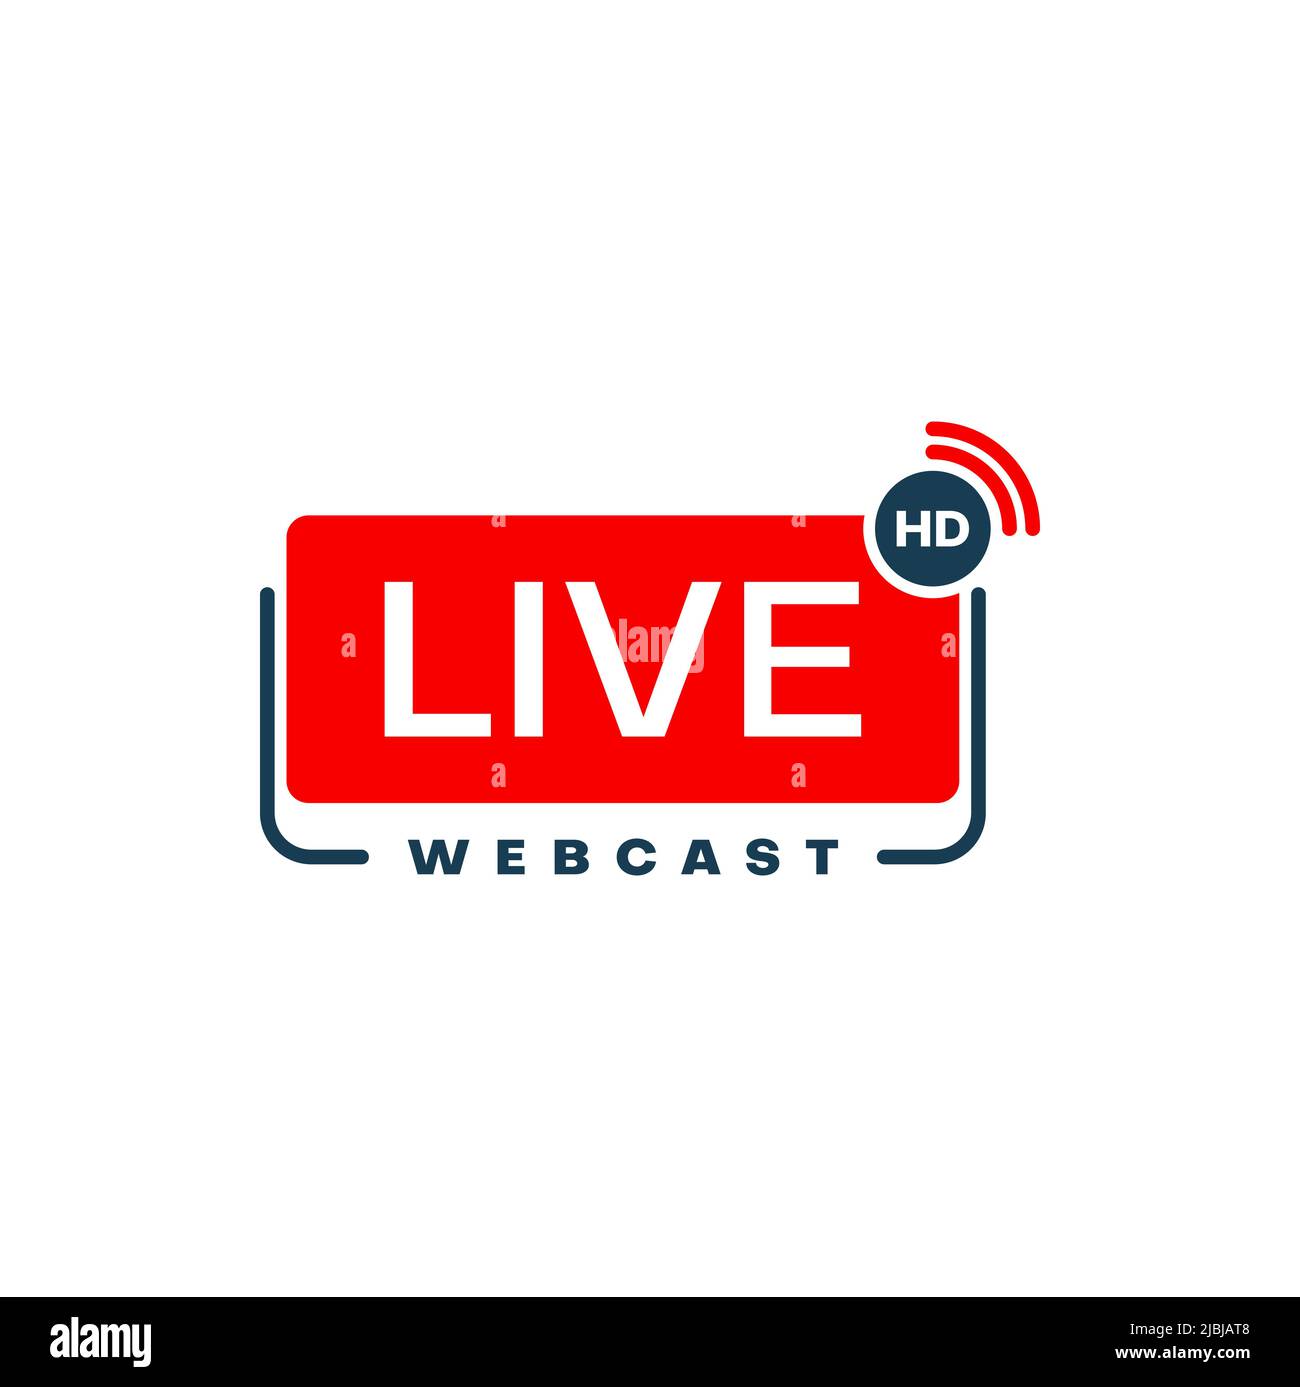 Live webcast or webinar vector icon of high definition video course, training or lesson, online conference